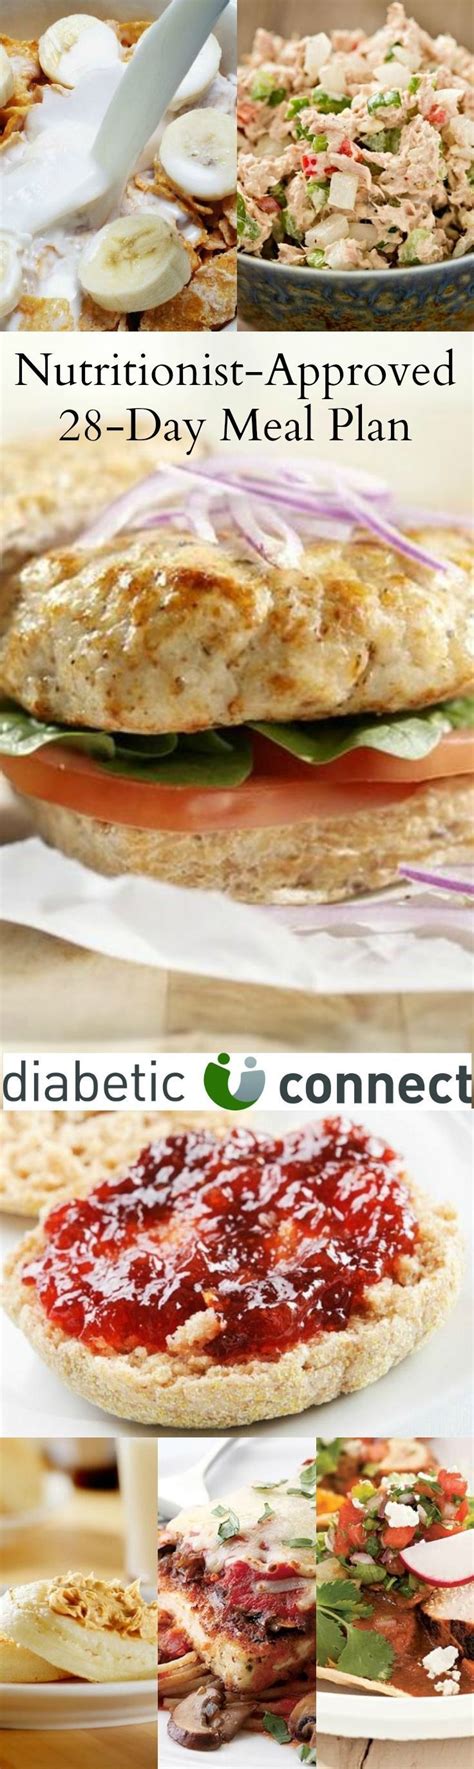 From the nutrition experts at the american diabetes association, diabetes food hub® is the premier food and cooking destination for people living with diabetes and their families. 34 best diabetic soul food recipes images on Pinterest | Diabetic recipes, Kitchens and Cooking ...